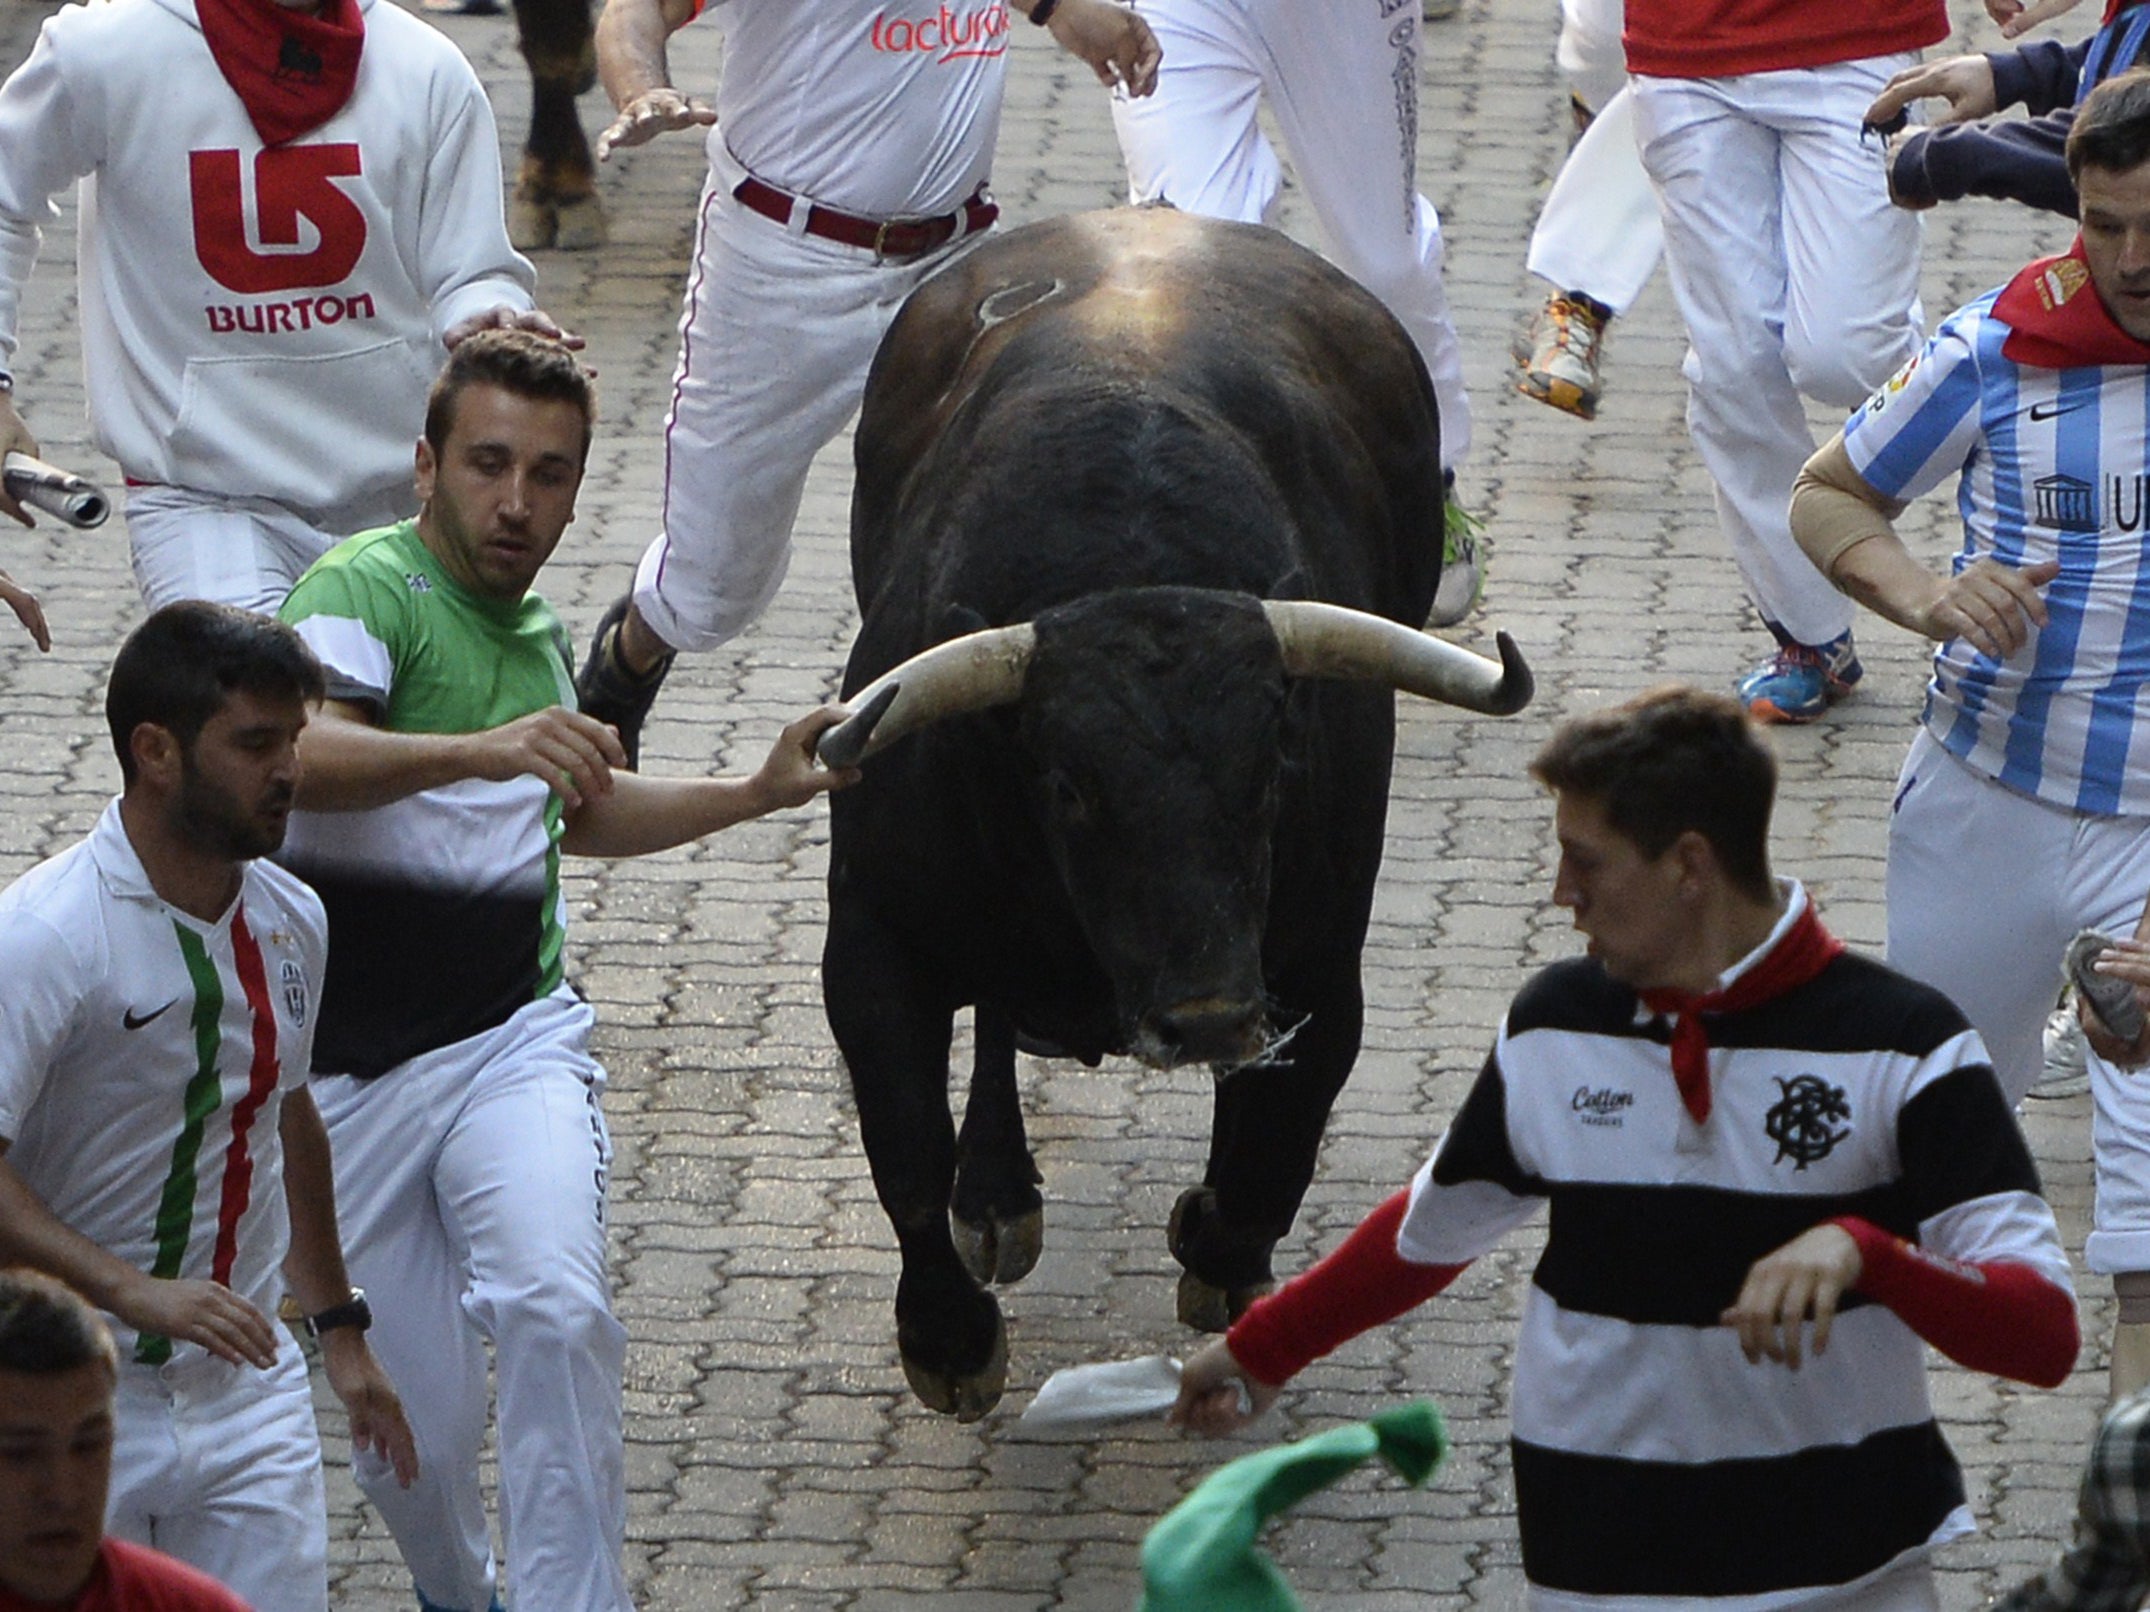 Participants in the San Fermin Festival in Pamplona, northern Spain, on July 10, 2015